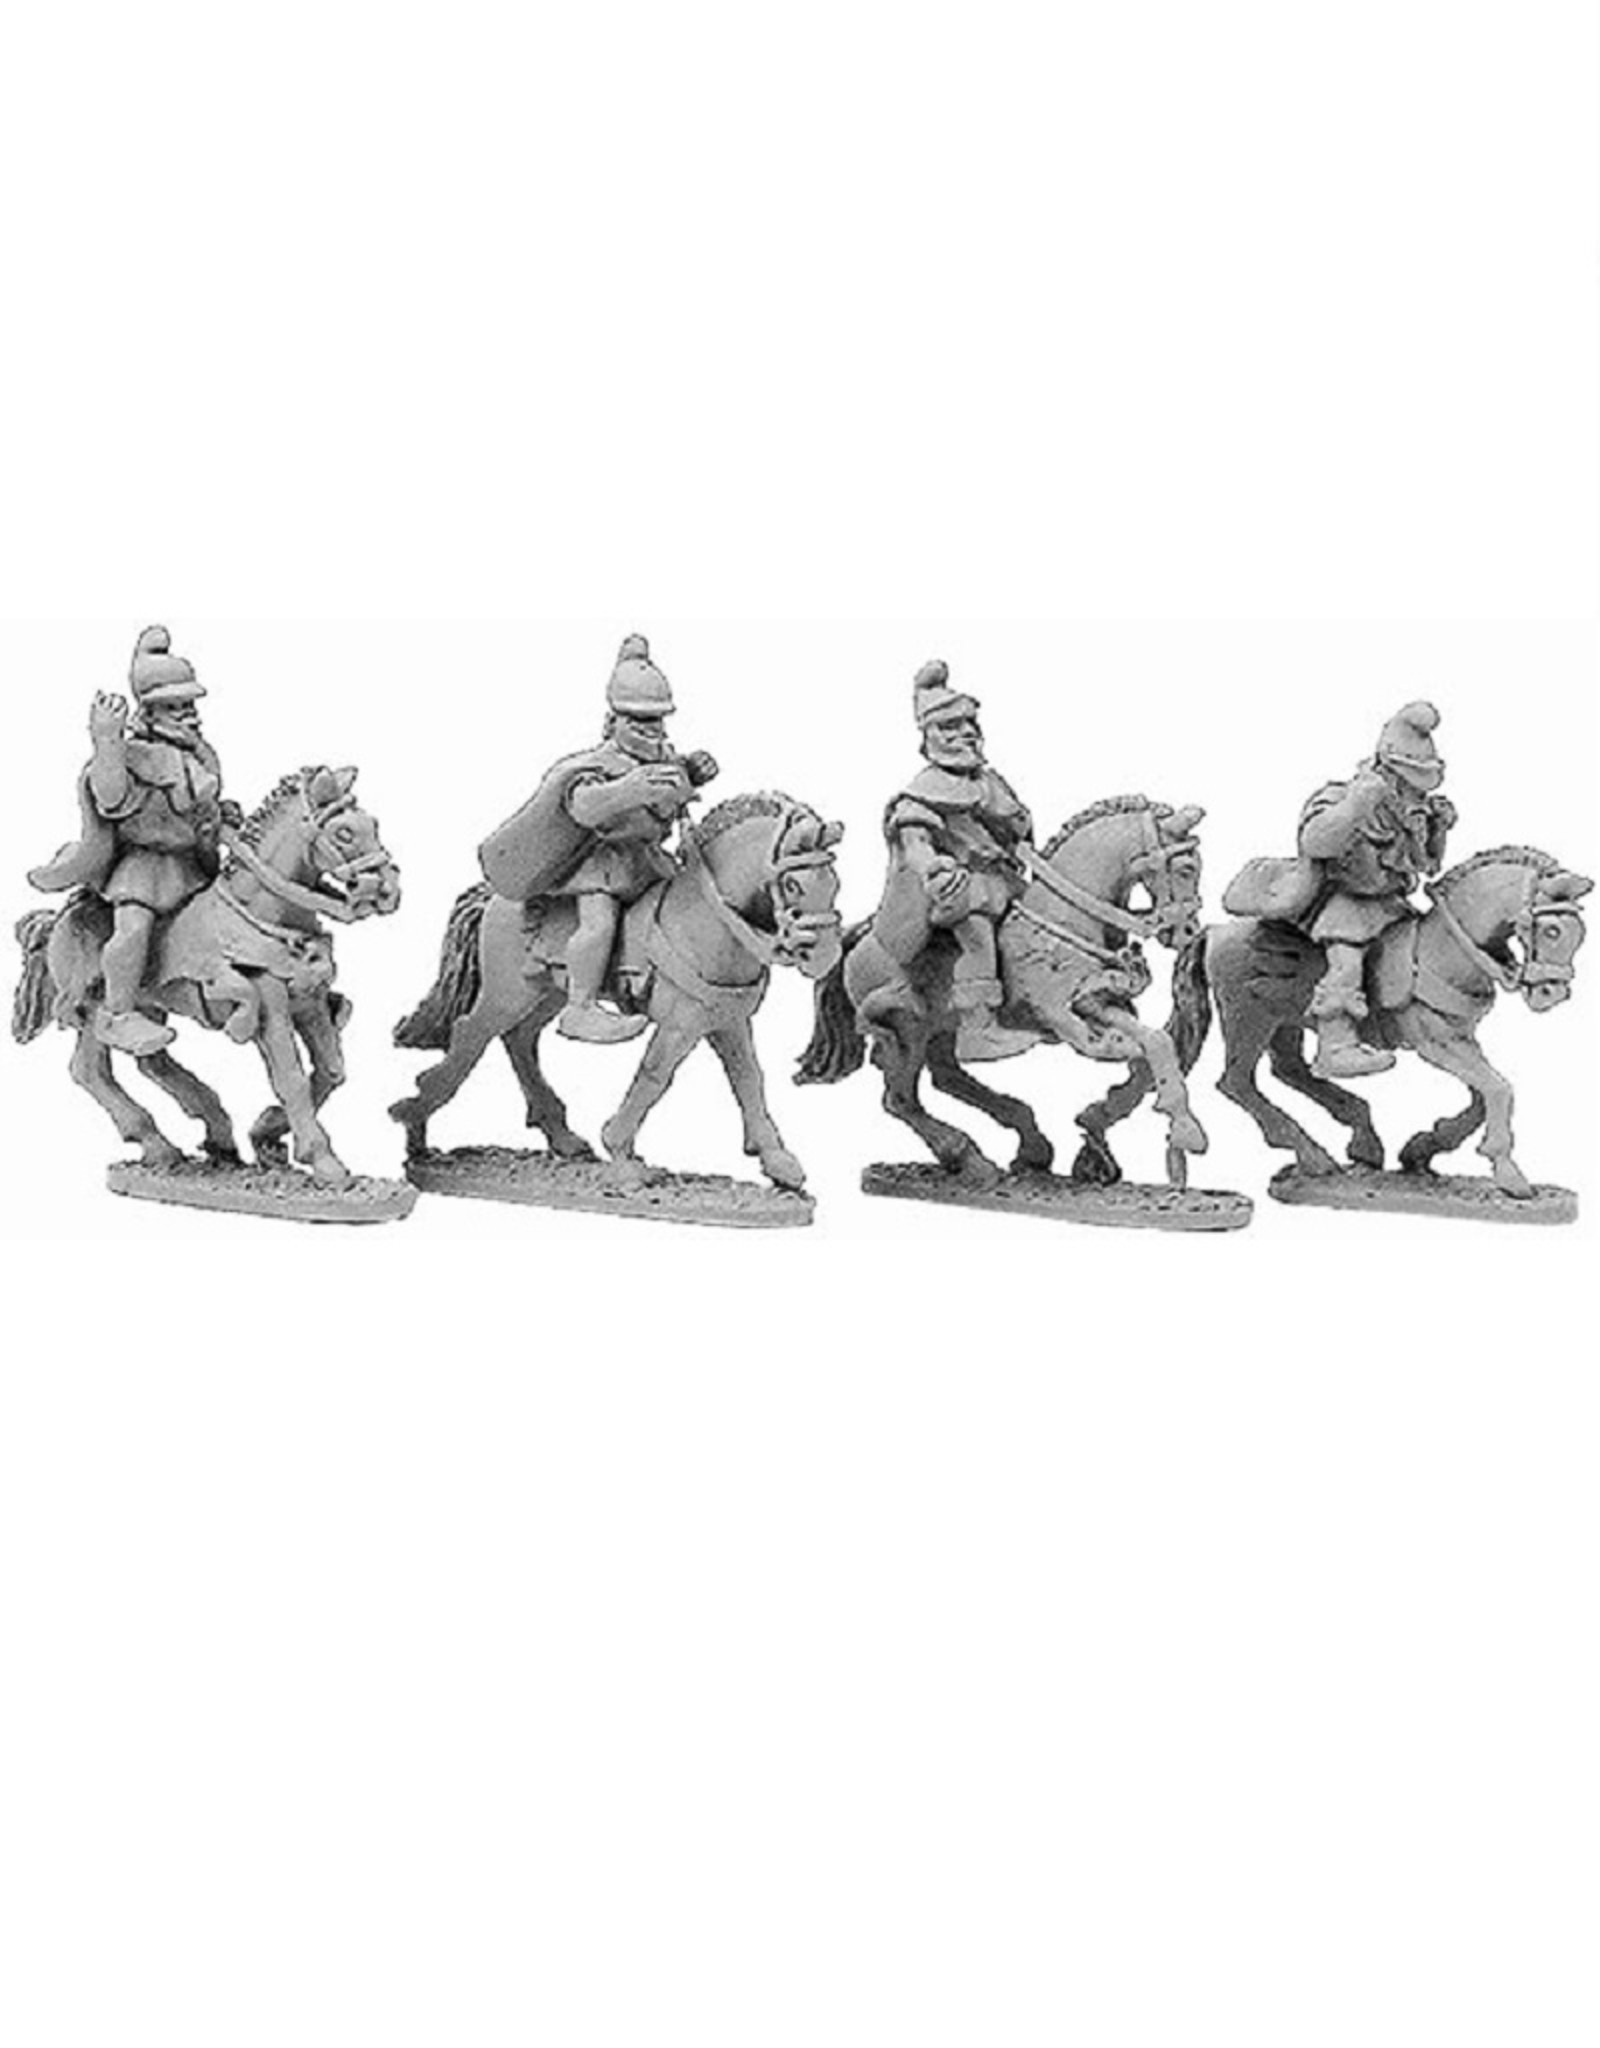 Xyston ANC20071 - Hellenistic Thracian Light Cavalry